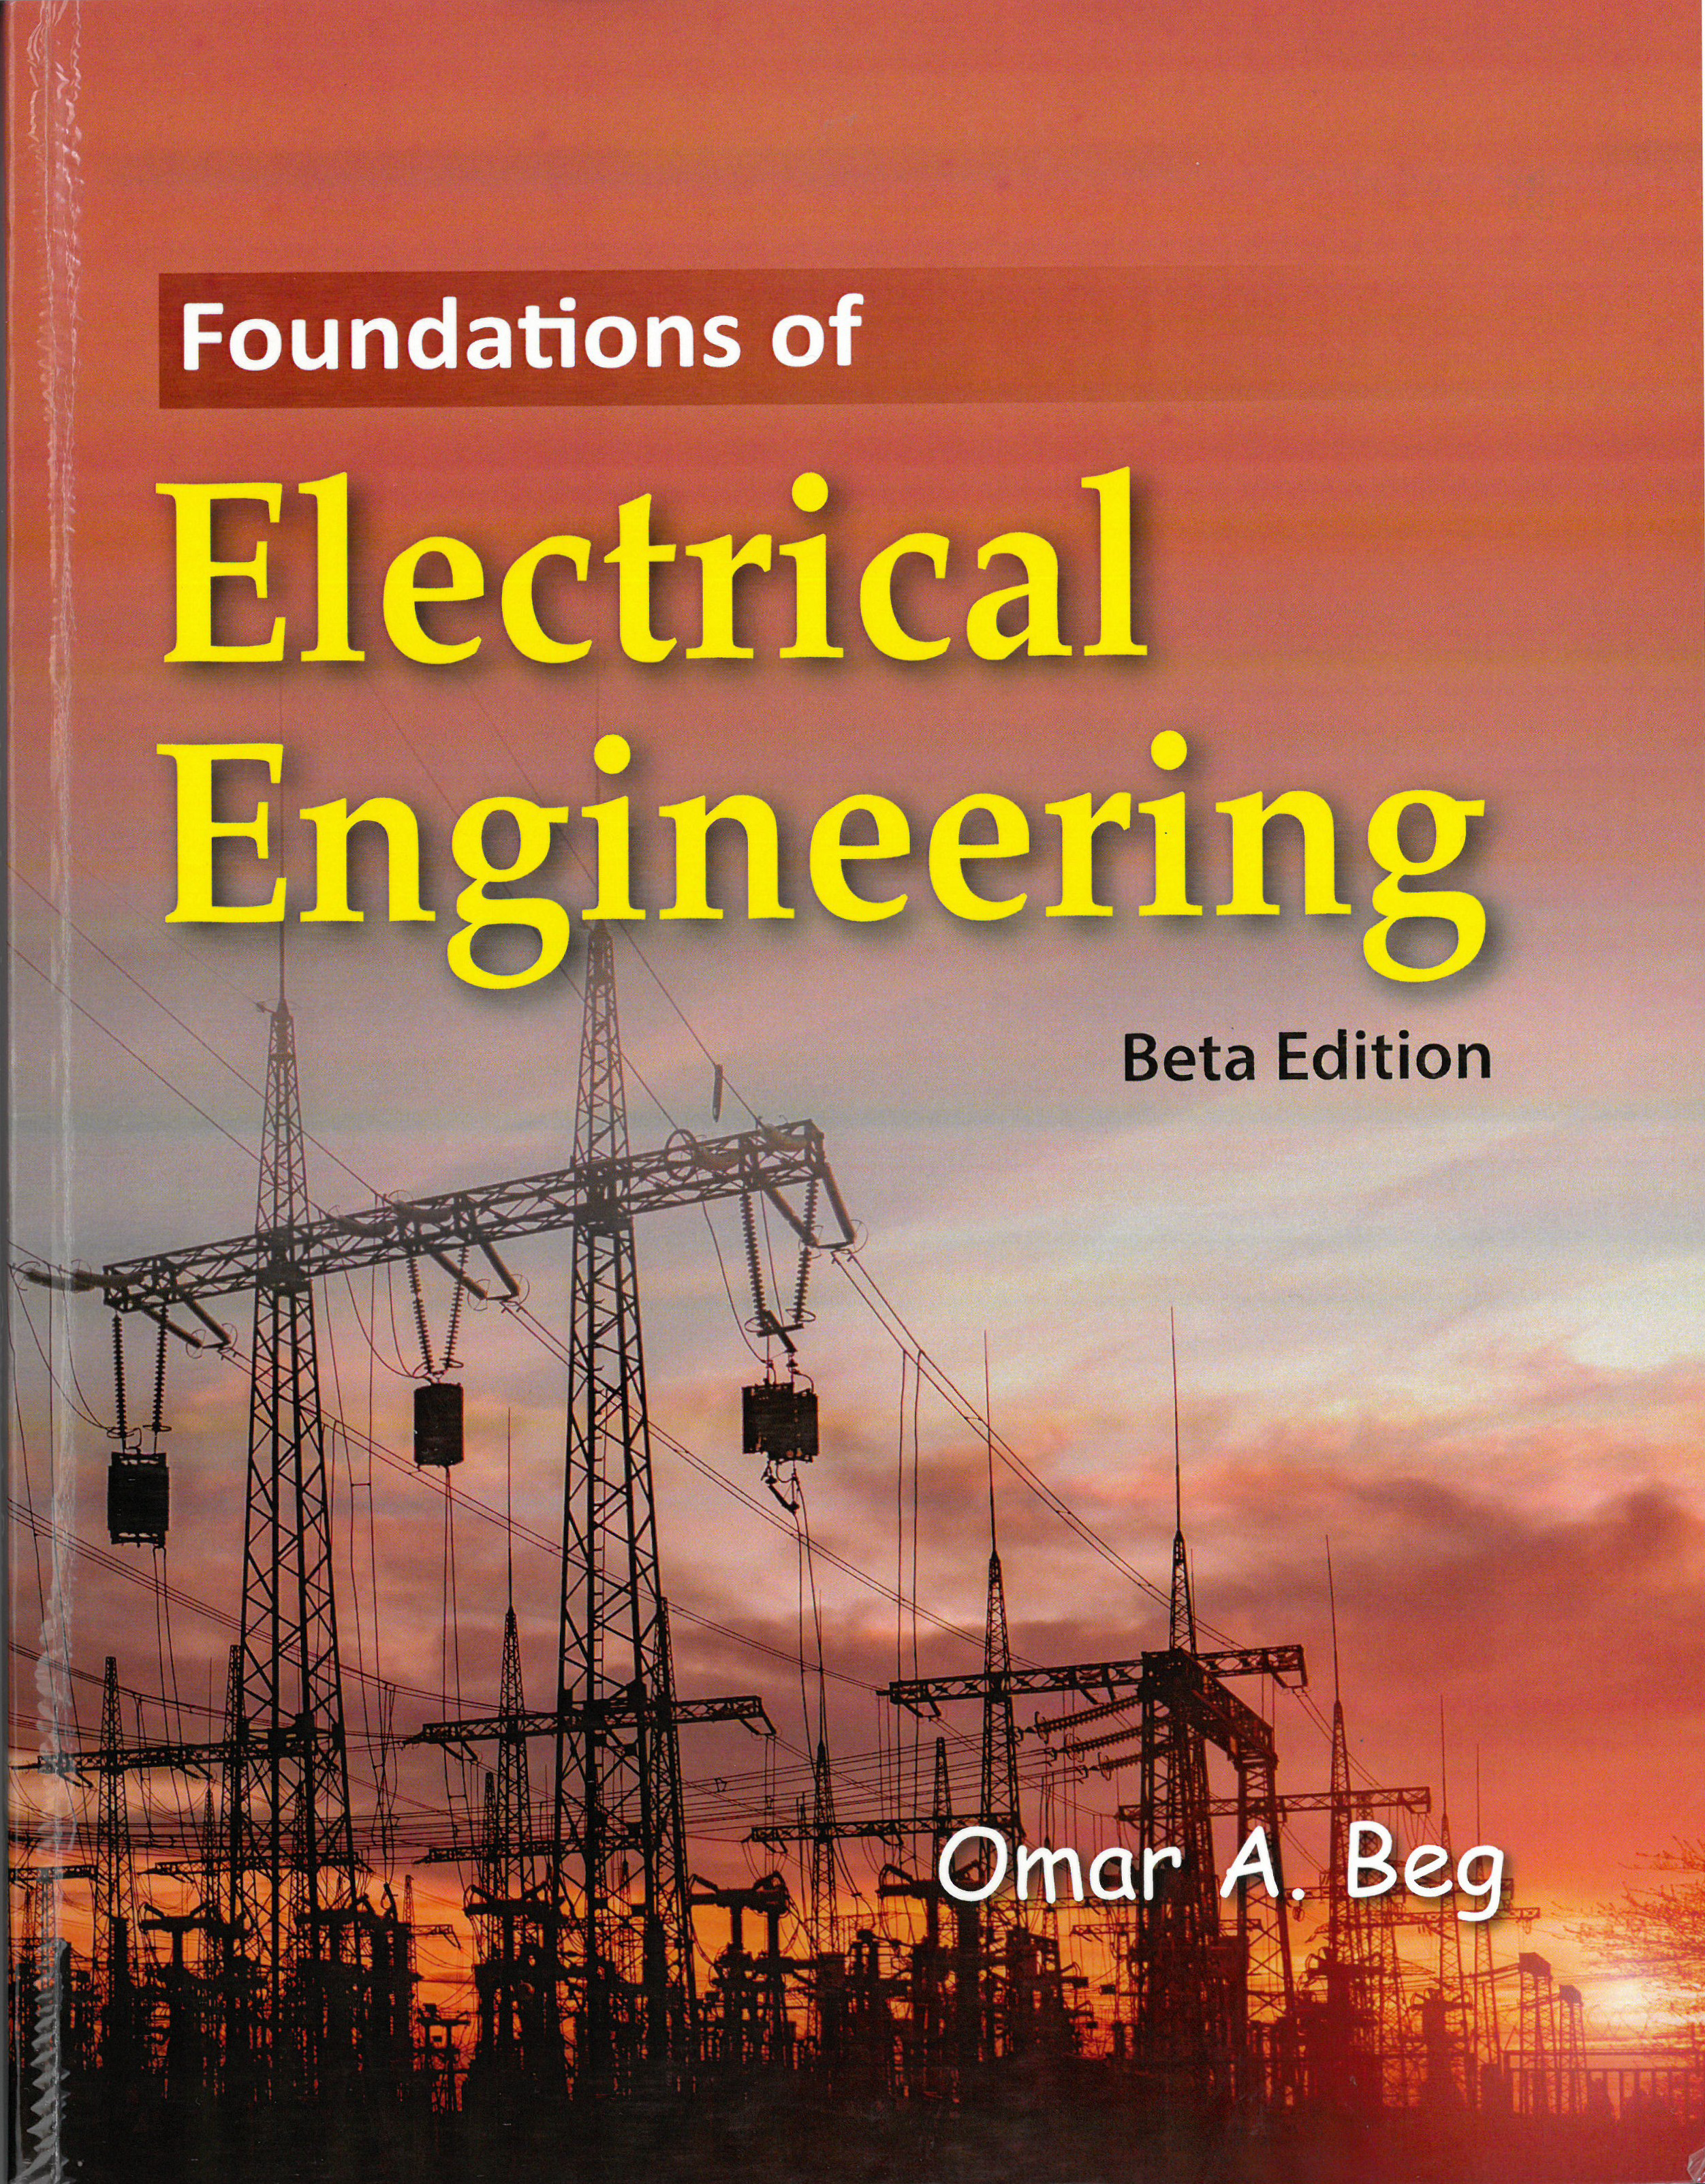 Foundations of Electrical Engineering by Omar Beg book title page